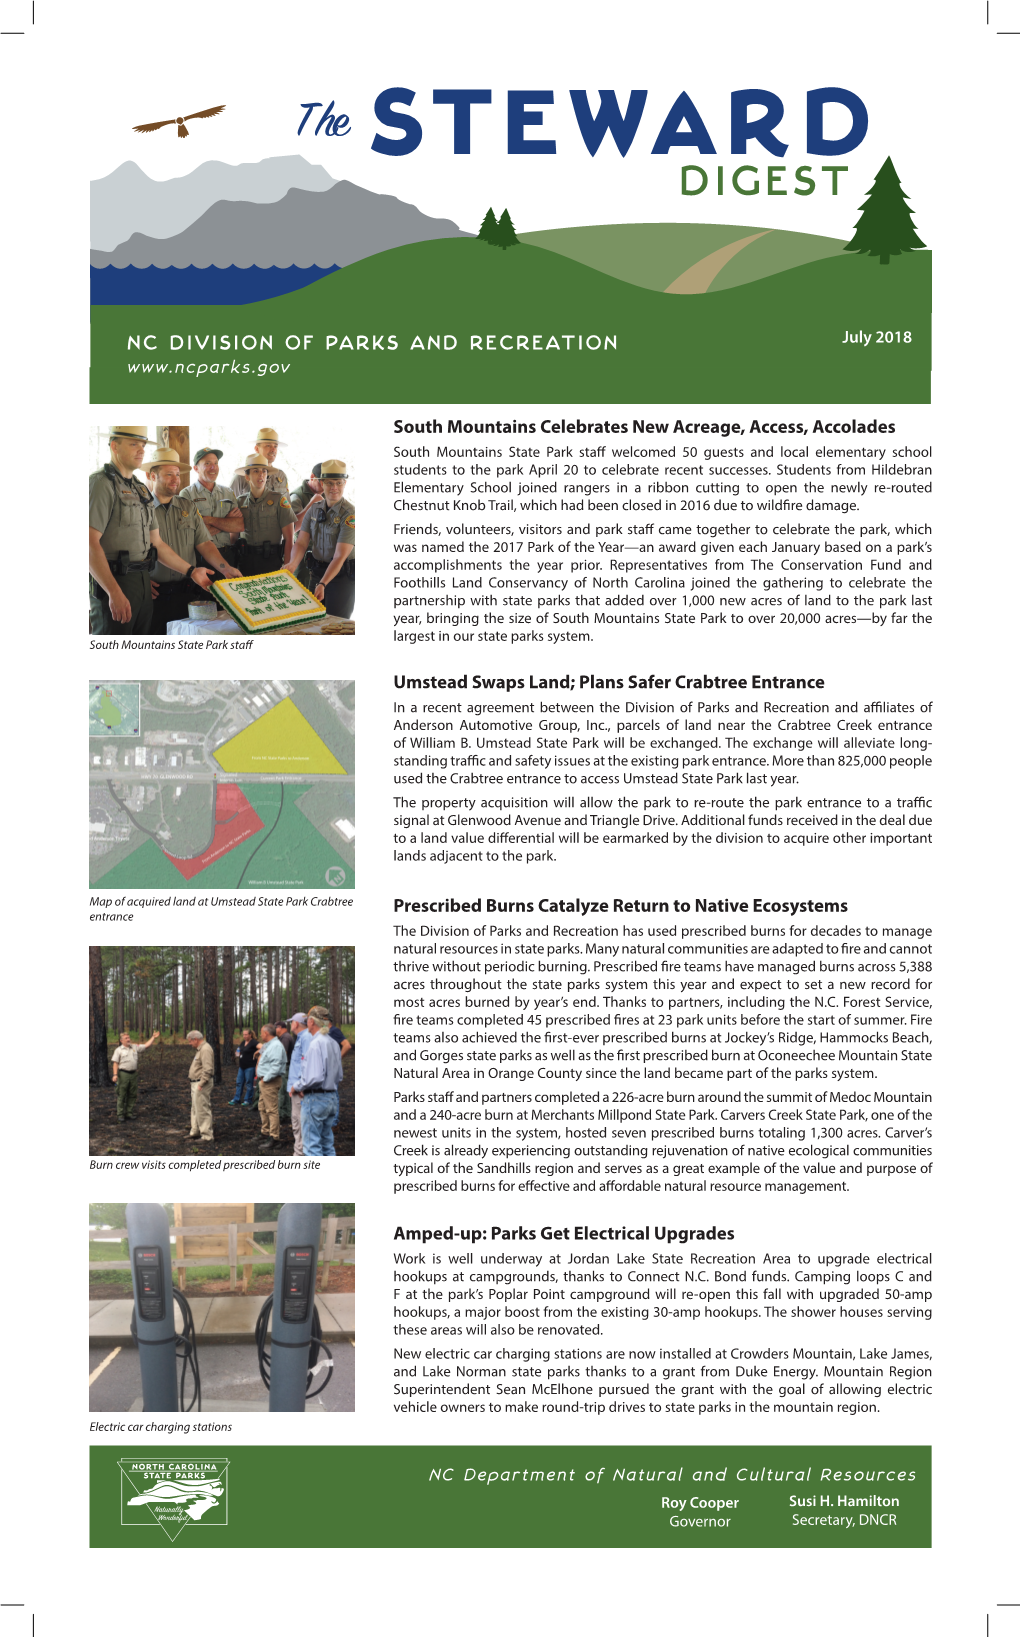 NC DIVISION of PARKS and RECREATION July 2018